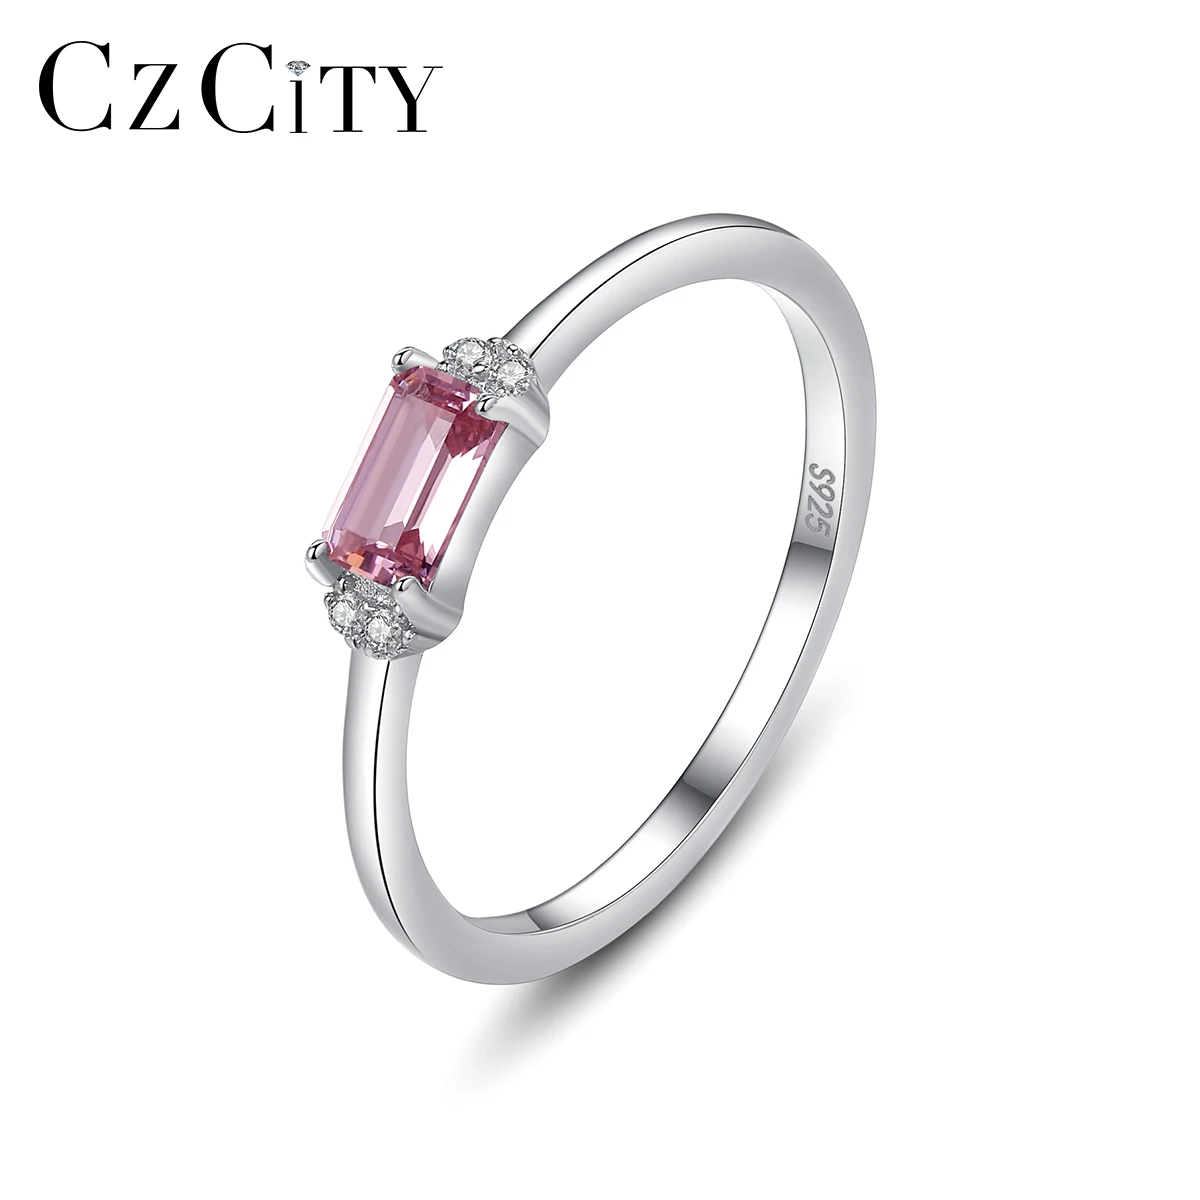 

CZCITY S925 Sterling Silver Single Ring Natural Pink Synthetic Gemstone Jewelry for Women Girlfriend Rings